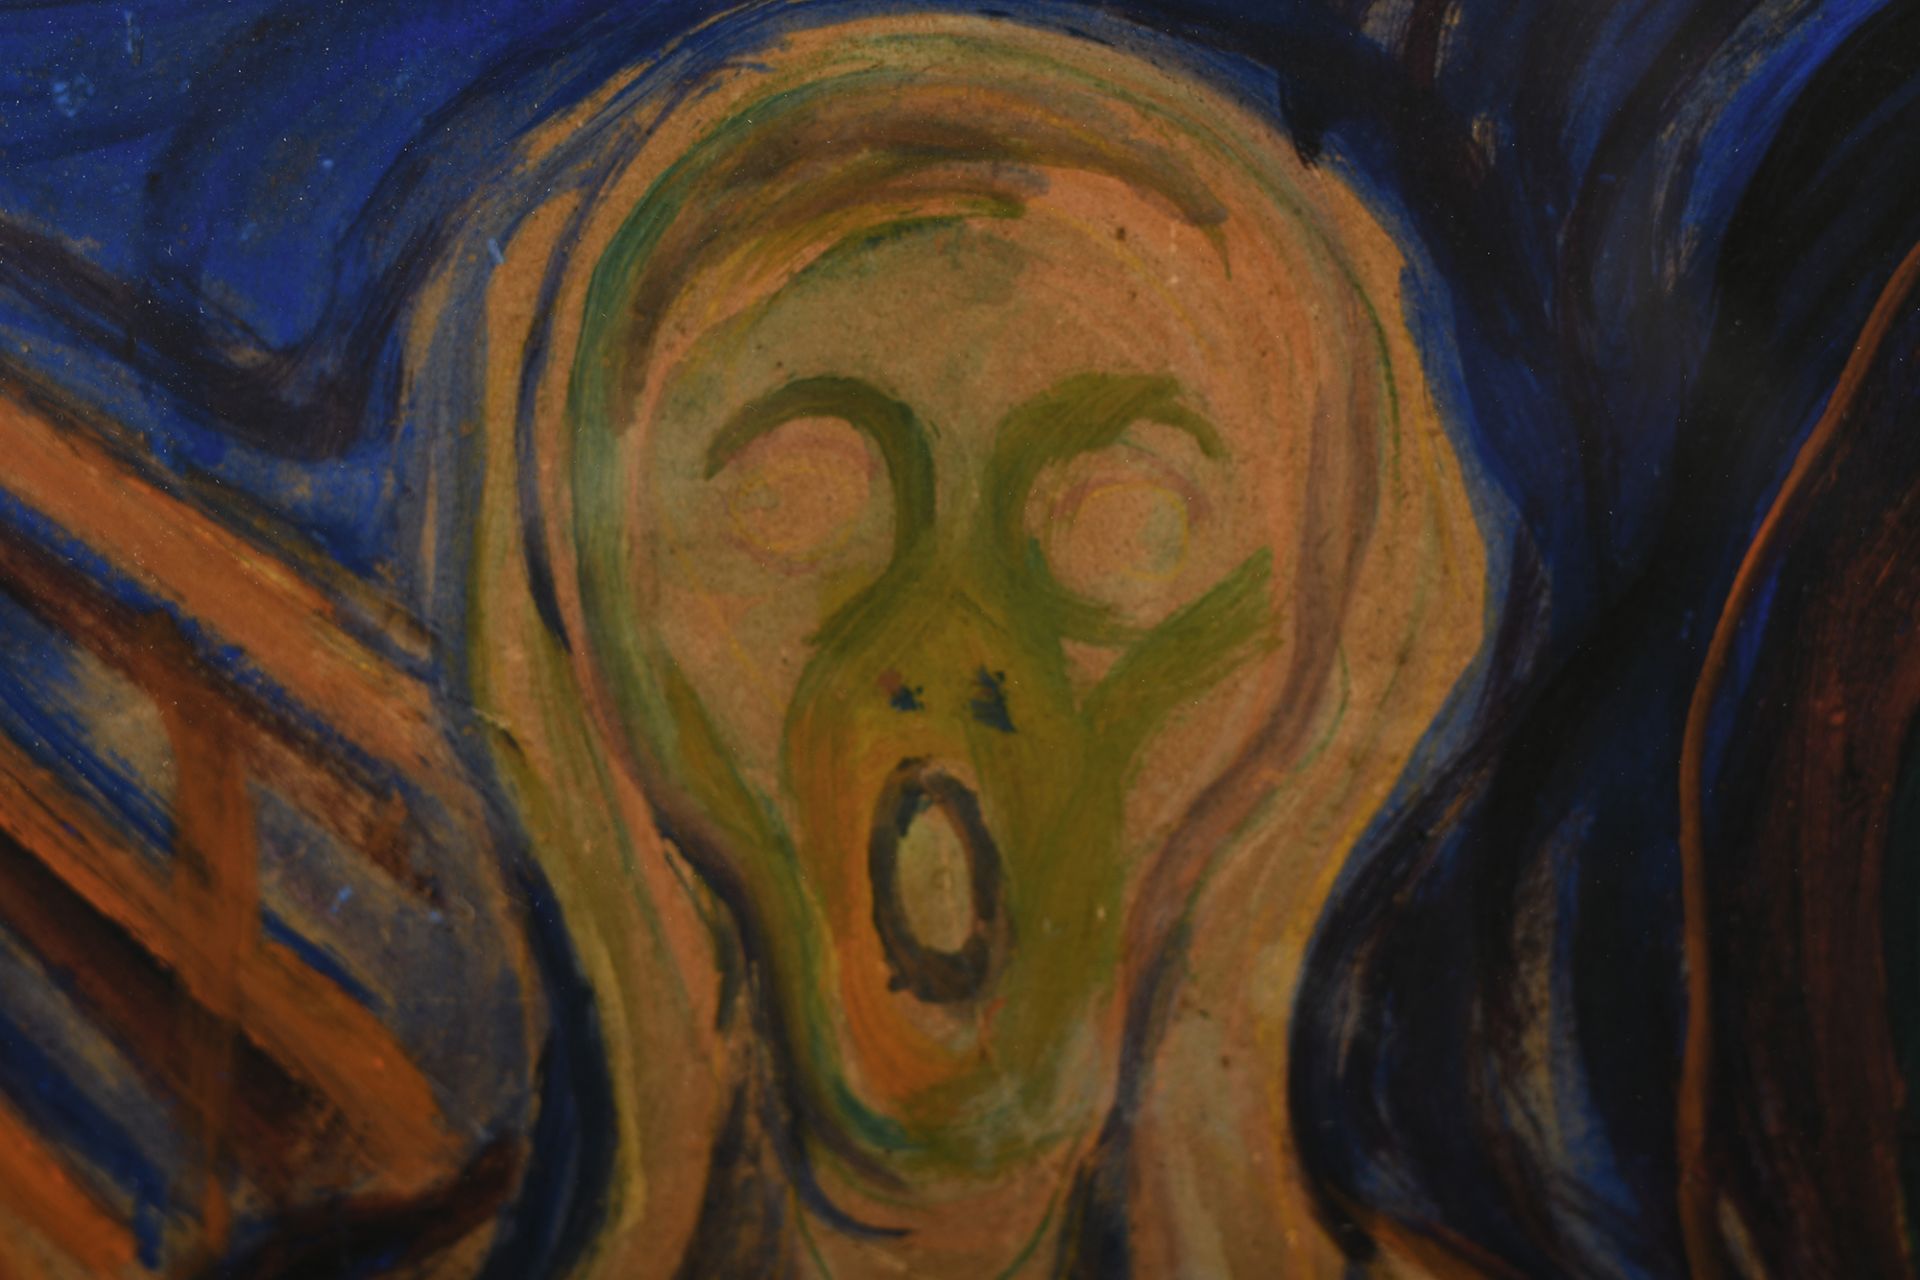 Rare Limited Edition Edvard Munch ""The Scream"" - Image 8 of 8